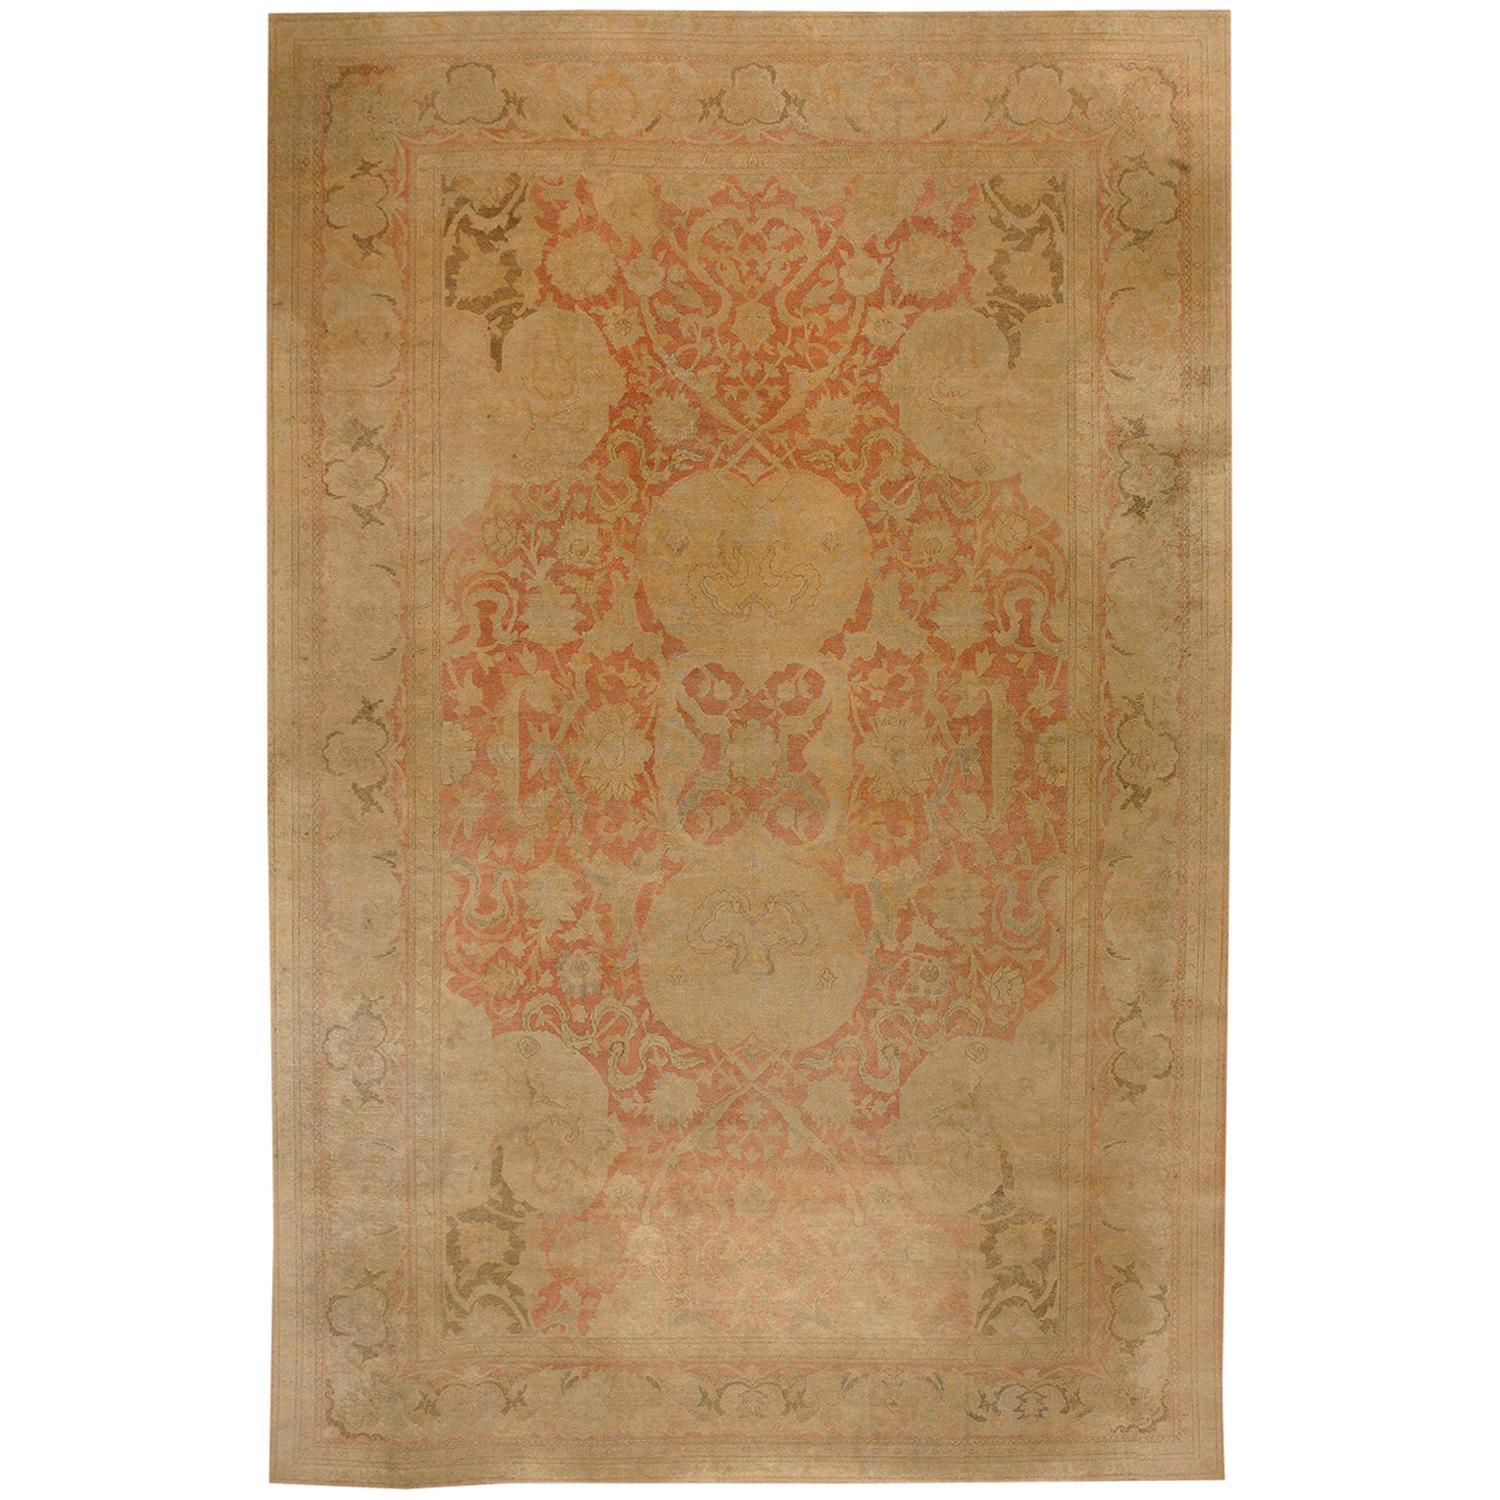 Late 19th Century N. Indian Amritsar Carpet ( 11' x 17'2" - 335 x 523 ) For Sale